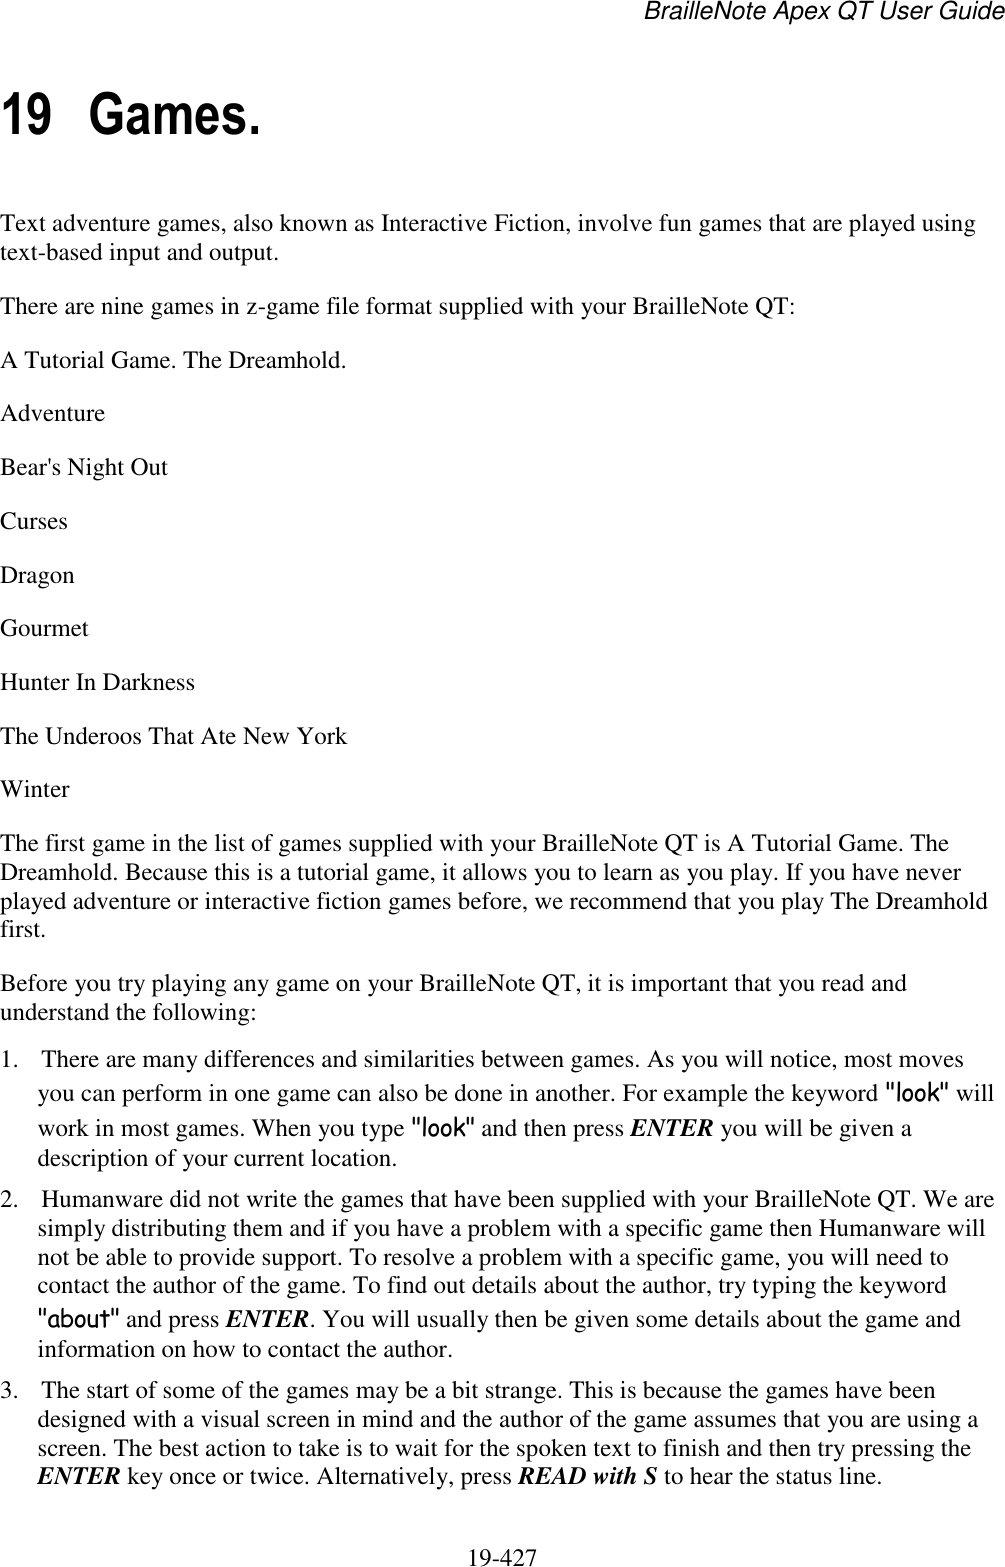 BrailleNote Apex QT User Guide  19-427   19 Games. Text adventure games, also known as Interactive Fiction, involve fun games that are played using text-based input and output. There are nine games in z-game file format supplied with your BrailleNote QT: A Tutorial Game. The Dreamhold. Adventure Bear&apos;s Night Out Curses Dragon Gourmet Hunter In Darkness The Underoos That Ate New York Winter The first game in the list of games supplied with your BrailleNote QT is A Tutorial Game. The Dreamhold. Because this is a tutorial game, it allows you to learn as you play. If you have never played adventure or interactive fiction games before, we recommend that you play The Dreamhold first.  Before you try playing any game on your BrailleNote QT, it is important that you read and understand the following: 1. There are many differences and similarities between games. As you will notice, most moves you can perform in one game can also be done in another. For example the keyword &quot;look&quot; will work in most games. When you type &quot;look&quot; and then press ENTER you will be given a description of your current location. 2. Humanware did not write the games that have been supplied with your BrailleNote QT. We are simply distributing them and if you have a problem with a specific game then Humanware will not be able to provide support. To resolve a problem with a specific game, you will need to contact the author of the game. To find out details about the author, try typing the keyword &quot;about&quot; and press ENTER. You will usually then be given some details about the game and information on how to contact the author. 3. The start of some of the games may be a bit strange. This is because the games have been designed with a visual screen in mind and the author of the game assumes that you are using a screen. The best action to take is to wait for the spoken text to finish and then try pressing the ENTER key once or twice. Alternatively, press READ with S to hear the status line. 